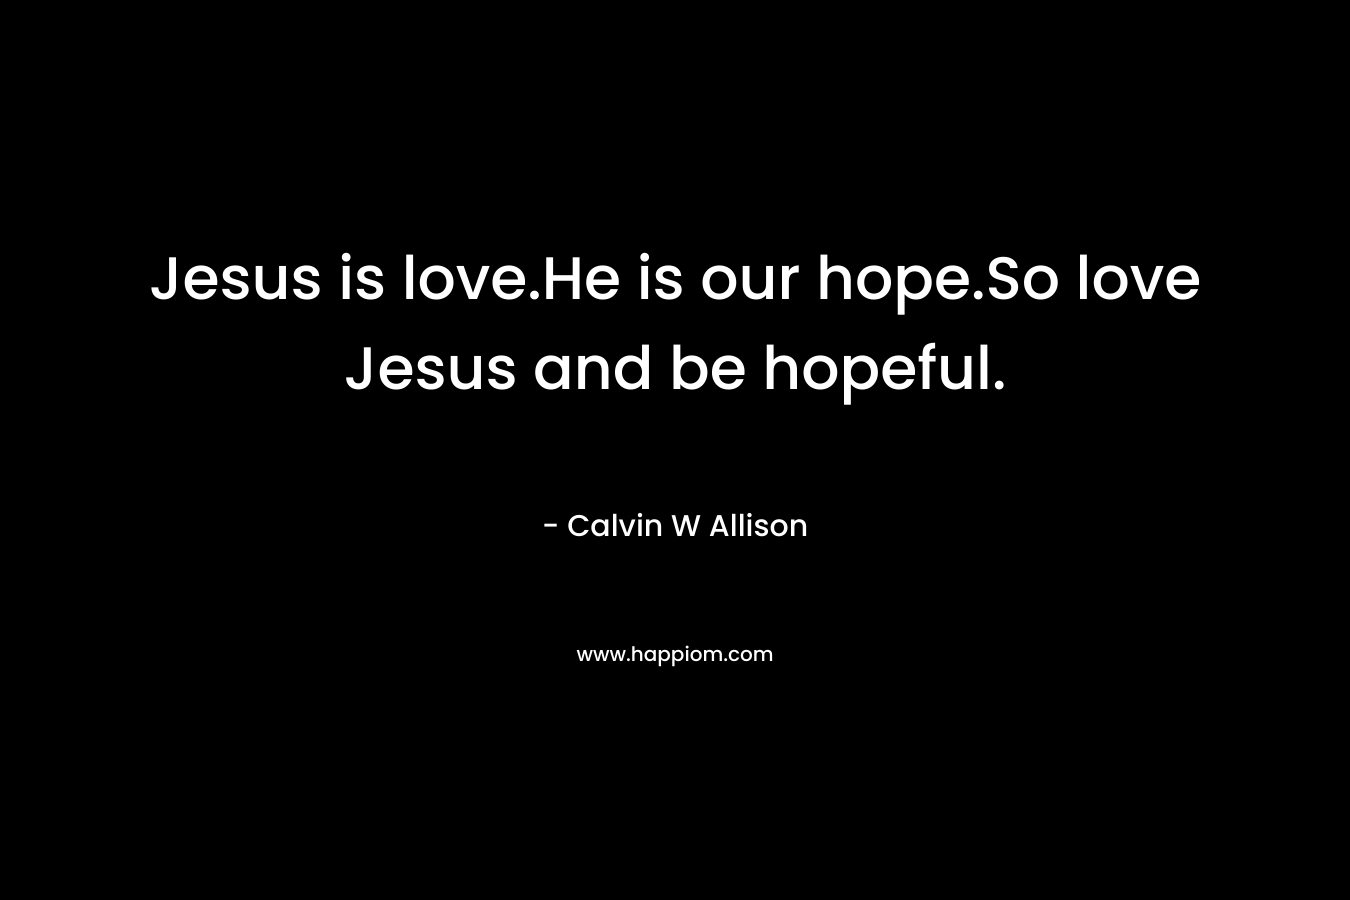 Jesus is love.He is our hope.So love Jesus and be hopeful.